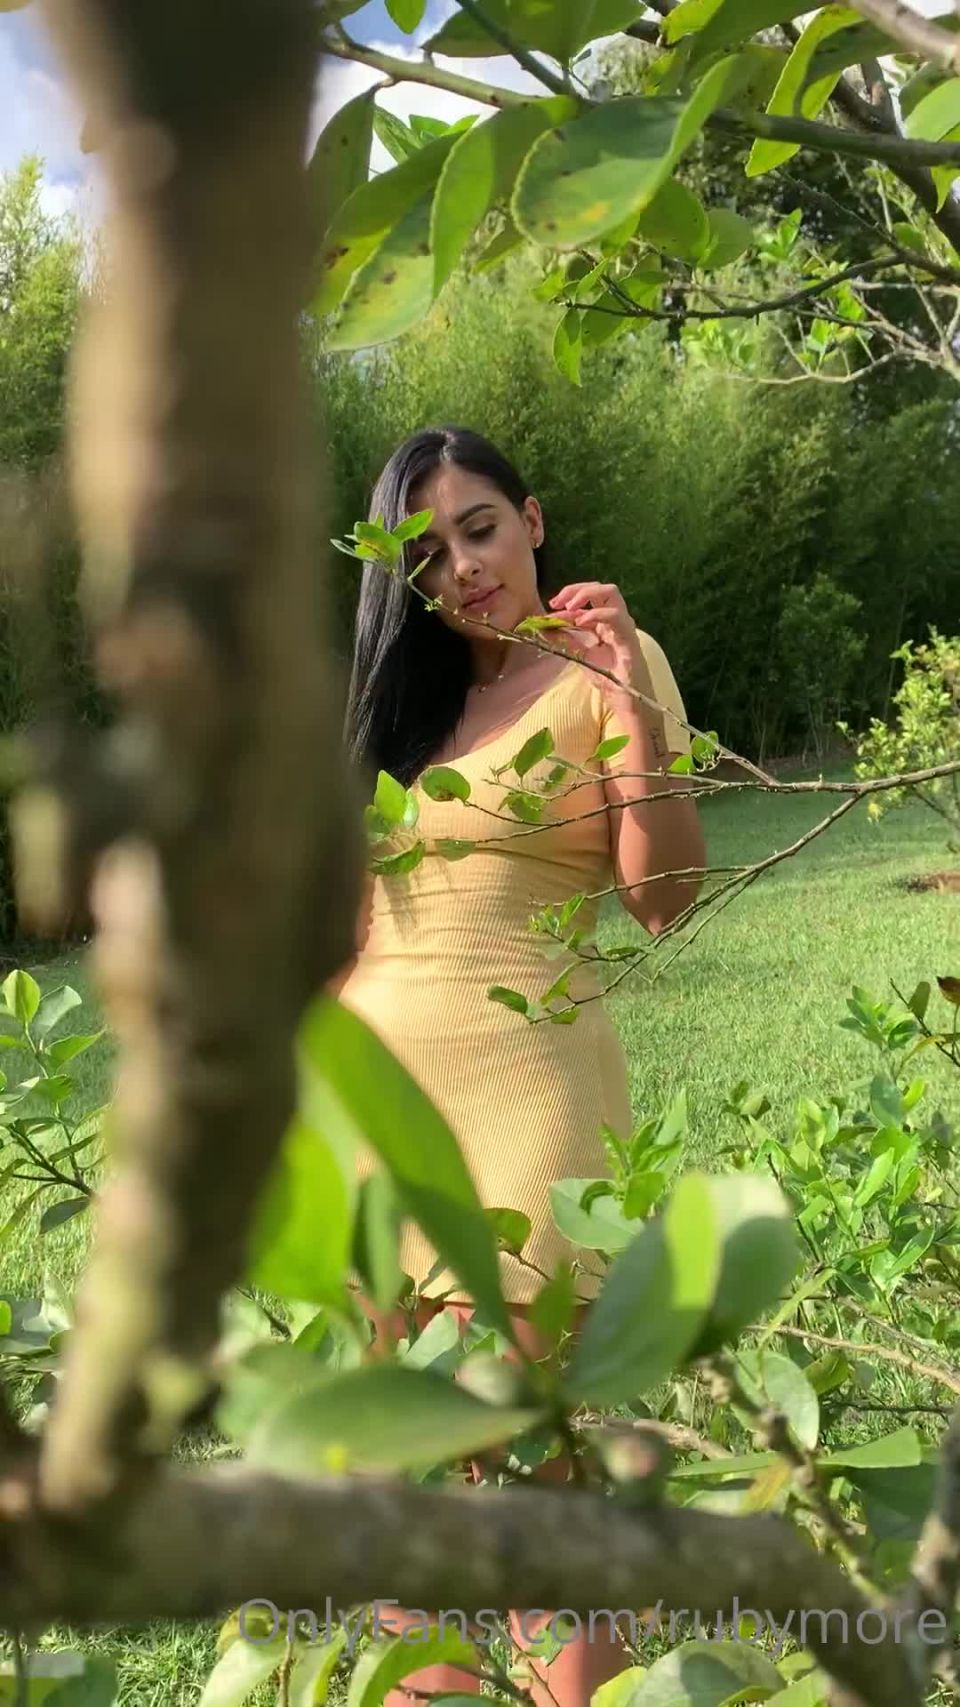 [Onlyfans] rubymore-10-08-2020-94258265-Happy Monday